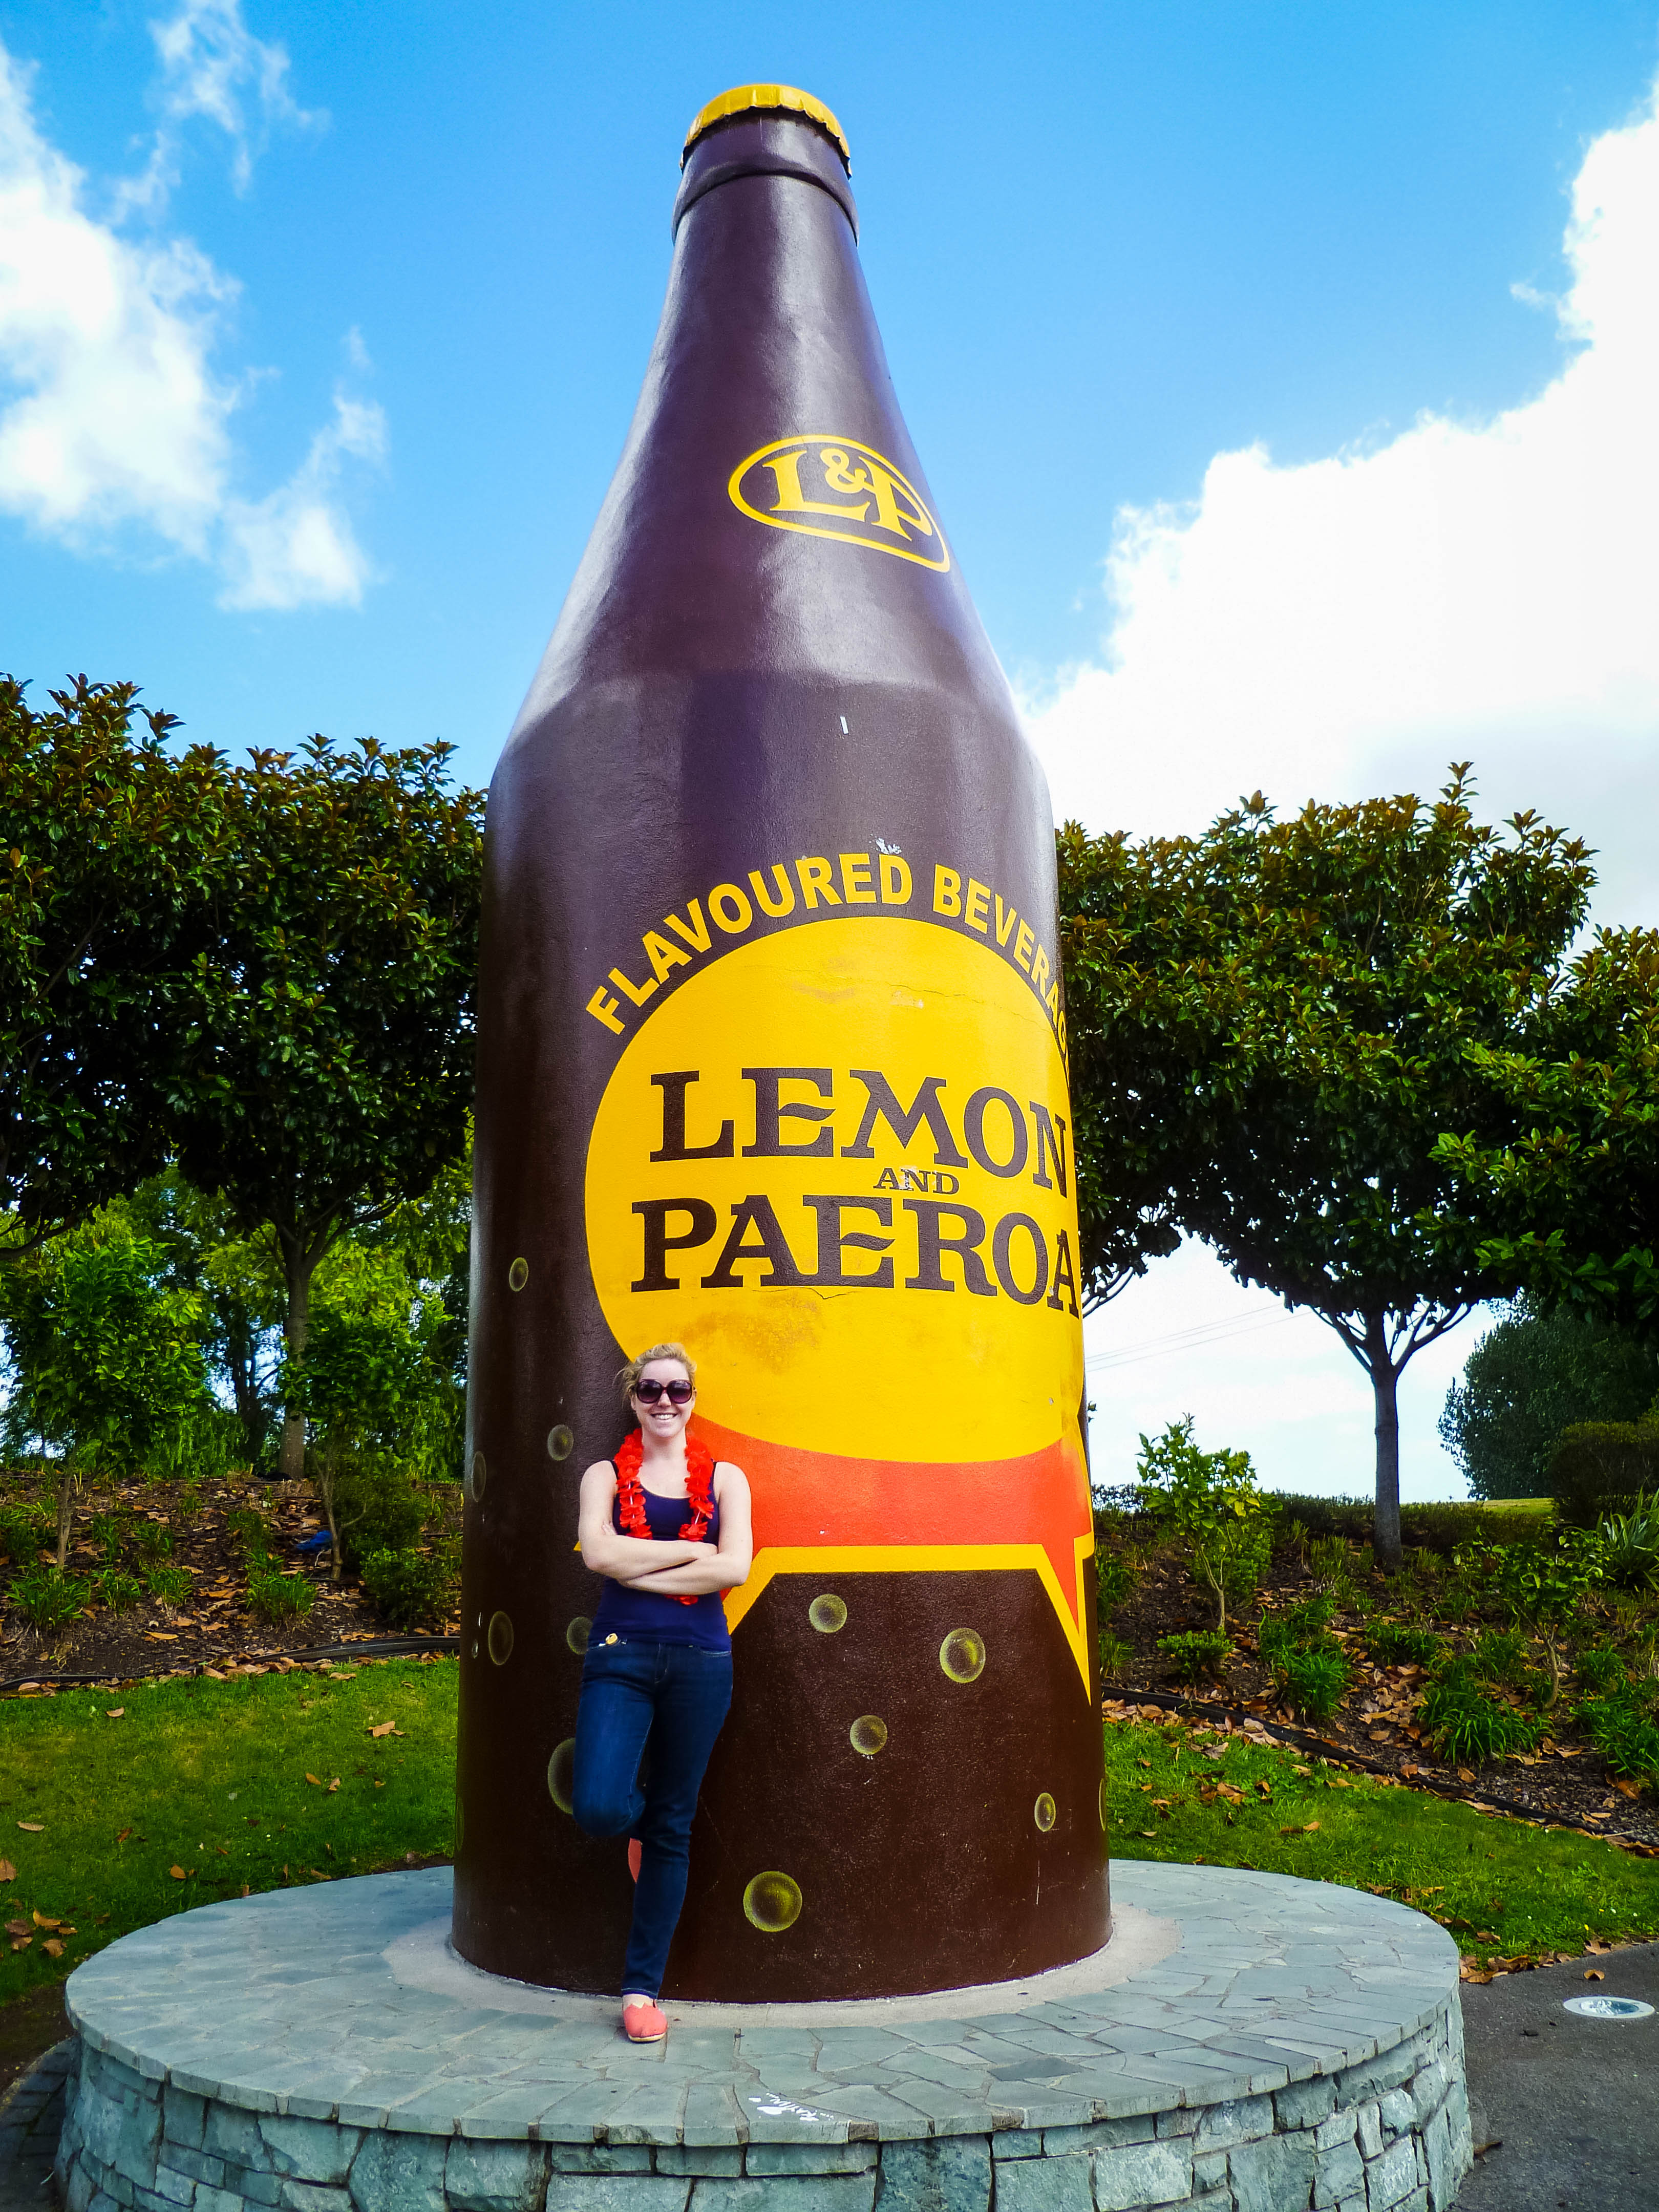 Big L and P bottle in New Zealand